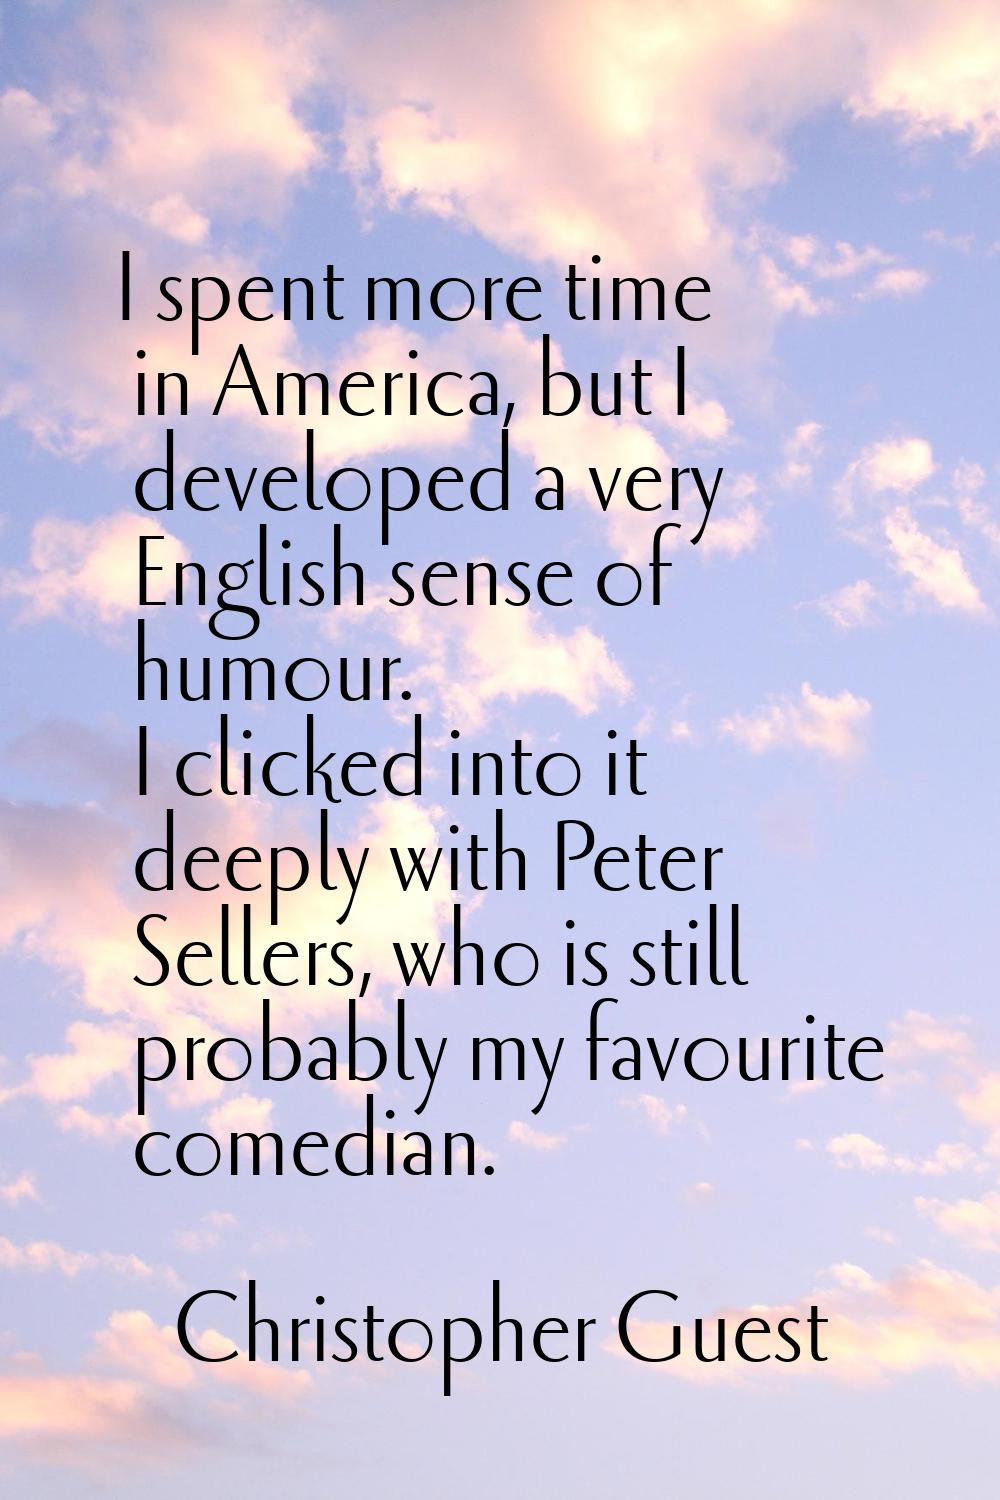 I spent more time in America, but I developed a very English sense of humour. I clicked into it dee